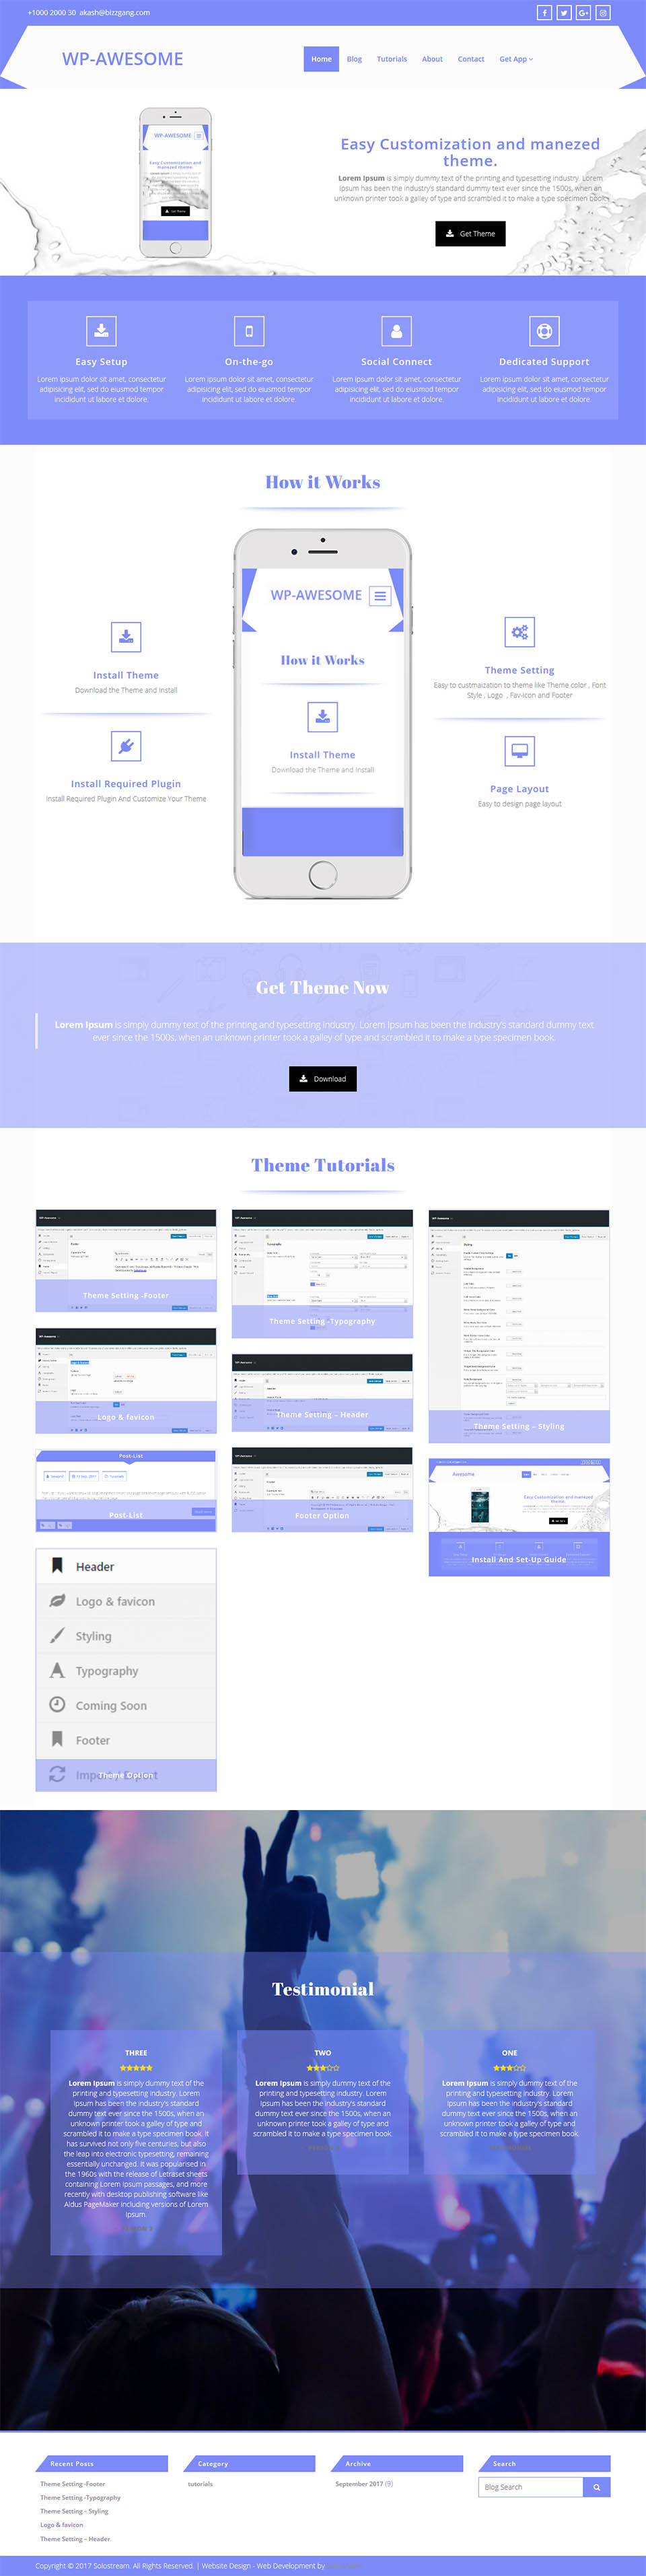 WordPress template SoloStream WP-Awesome